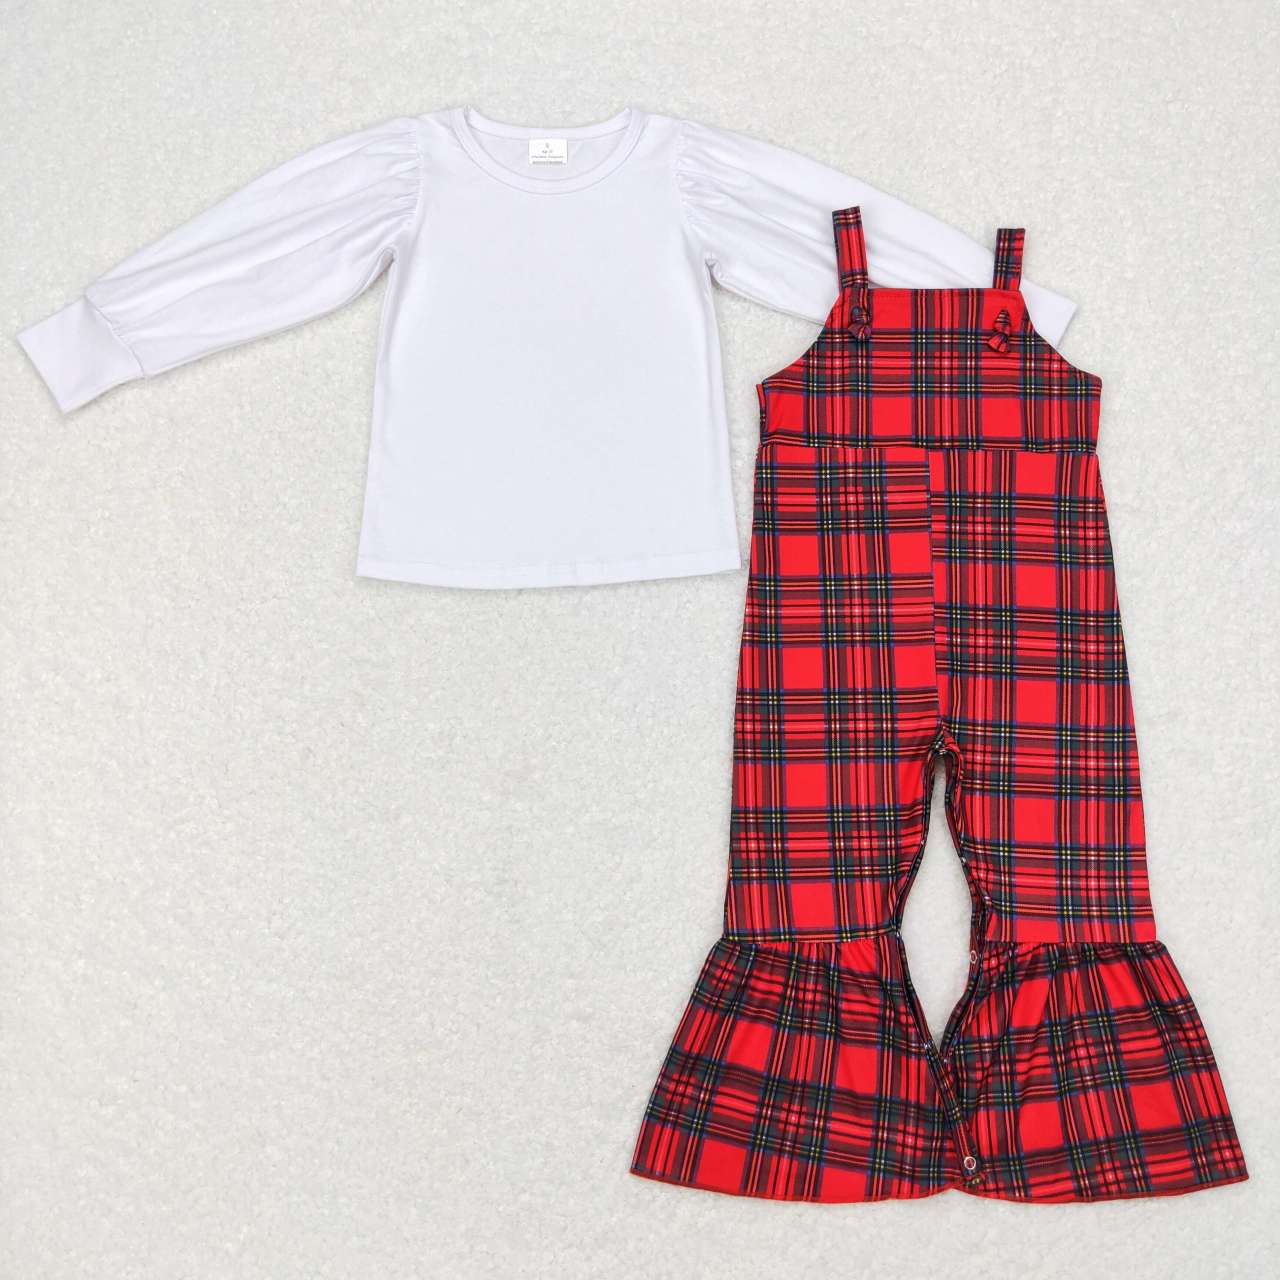 white cotton shirt+red plaid jumpsuit girls outfit